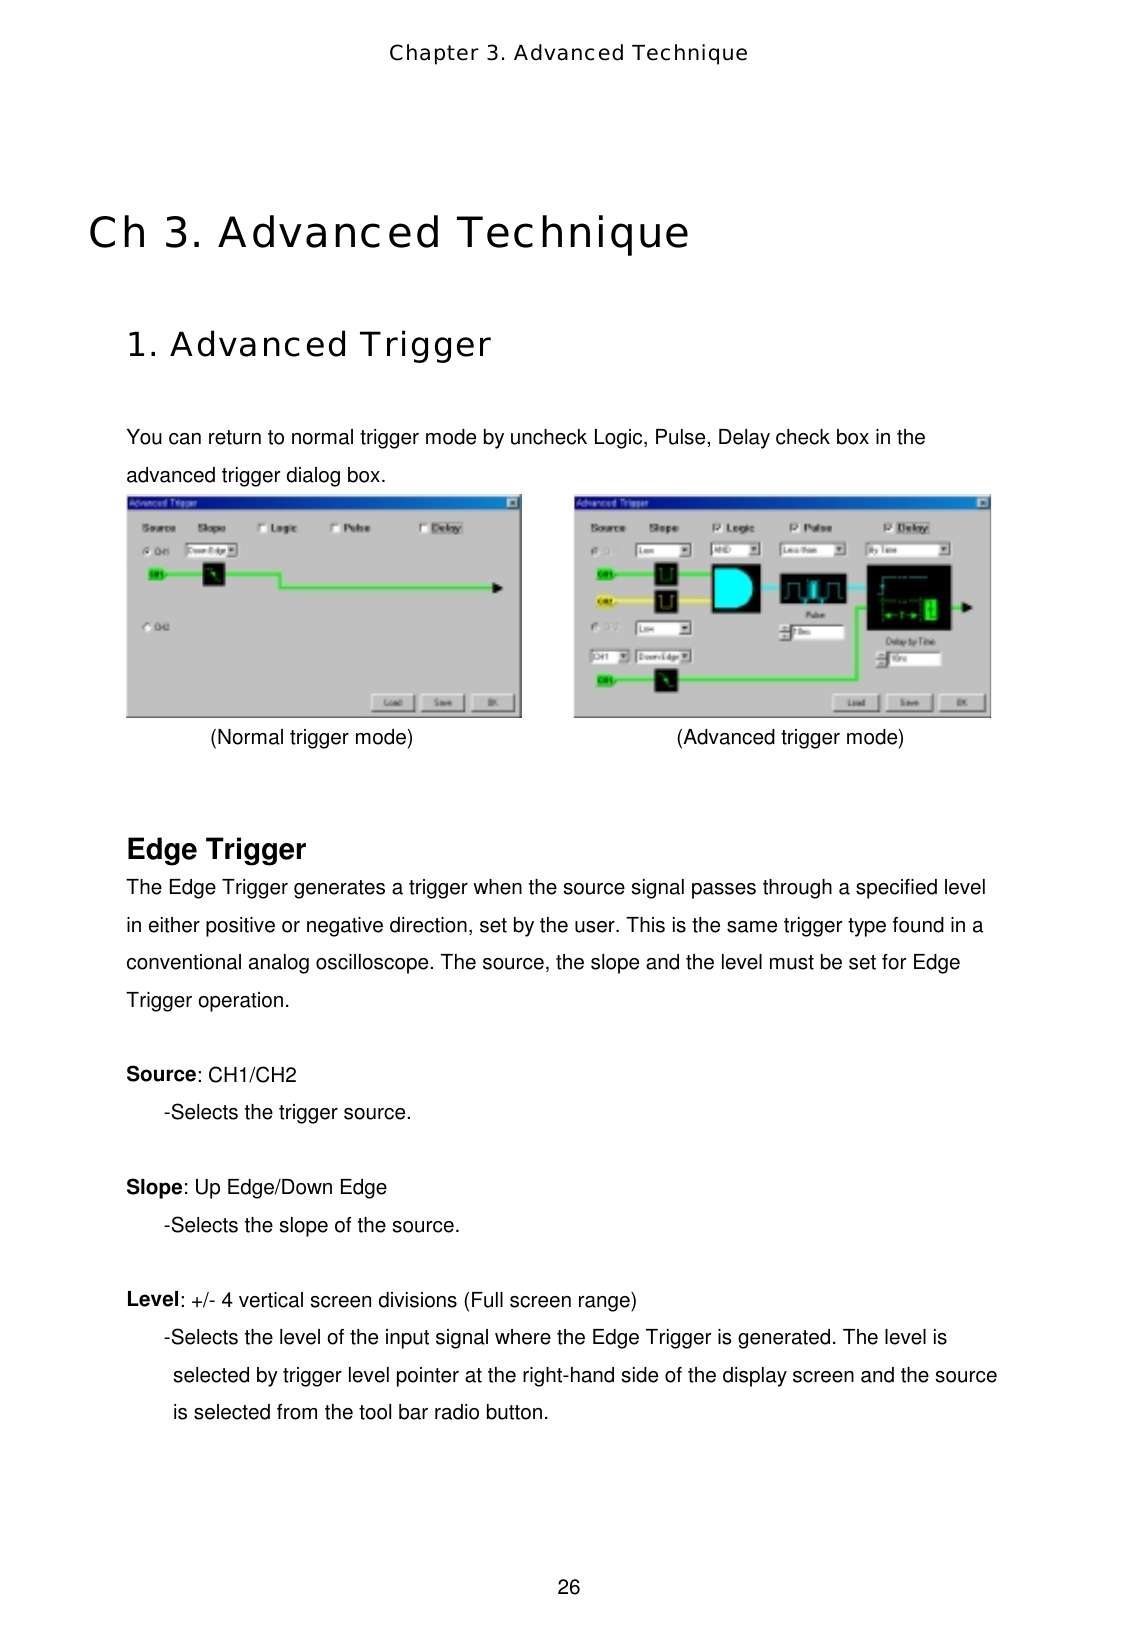 Chapter 3. Advanced Technique  26  Ch 3. Advanced Technique  1. Advanced Trigger  You can return to normal trigger mode by uncheck Logic, Pulse, Delay check box in the advanced trigger dialog box.              (Normal trigger mode)                         (Advanced trigger mode)   Edge Trigger The Edge Trigger generates a trigger when the source signal passes through a specified level in either positive or negative direction, set by the user. This is the same trigger type found in a conventional analog oscilloscope. The source, the slope and the level must be set for Edge Trigger operation.    Source: CH1/CH2 -Selects the trigger source.  Slope: Up Edge/Down Edge -Selects the slope of the source.  Level: +/- 4 vertical screen divisions (Full screen range) -Selects the level of the input signal where the Edge Trigger is generated. The level is selected by trigger level pointer at the right-hand side of the display screen and the source is selected from the tool bar radio button.   